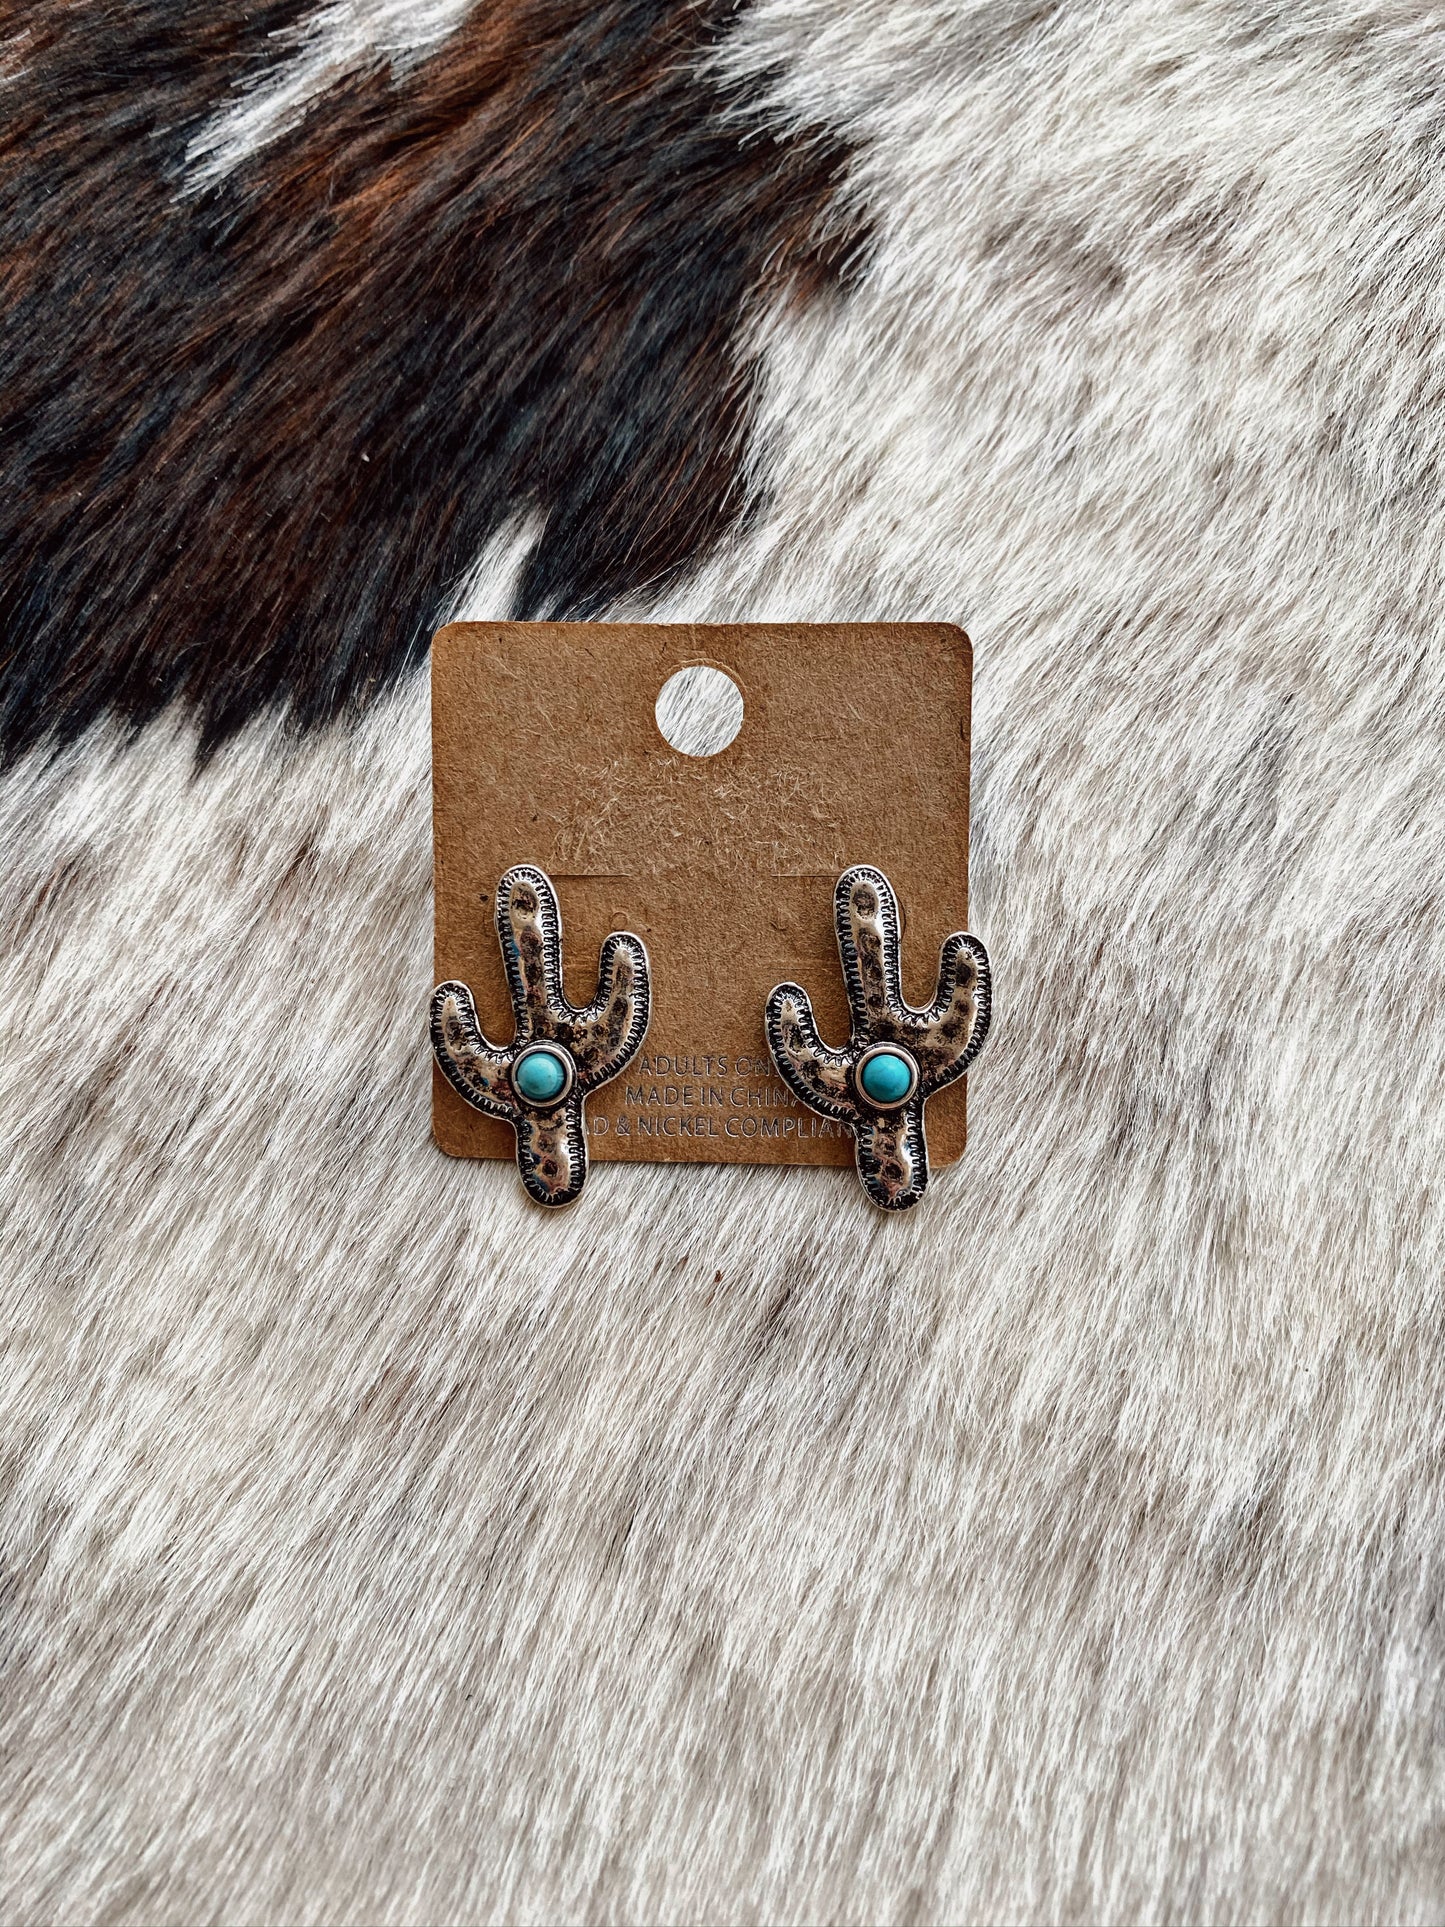 Turquoise and Silvertone Mesa Cactus Earrings